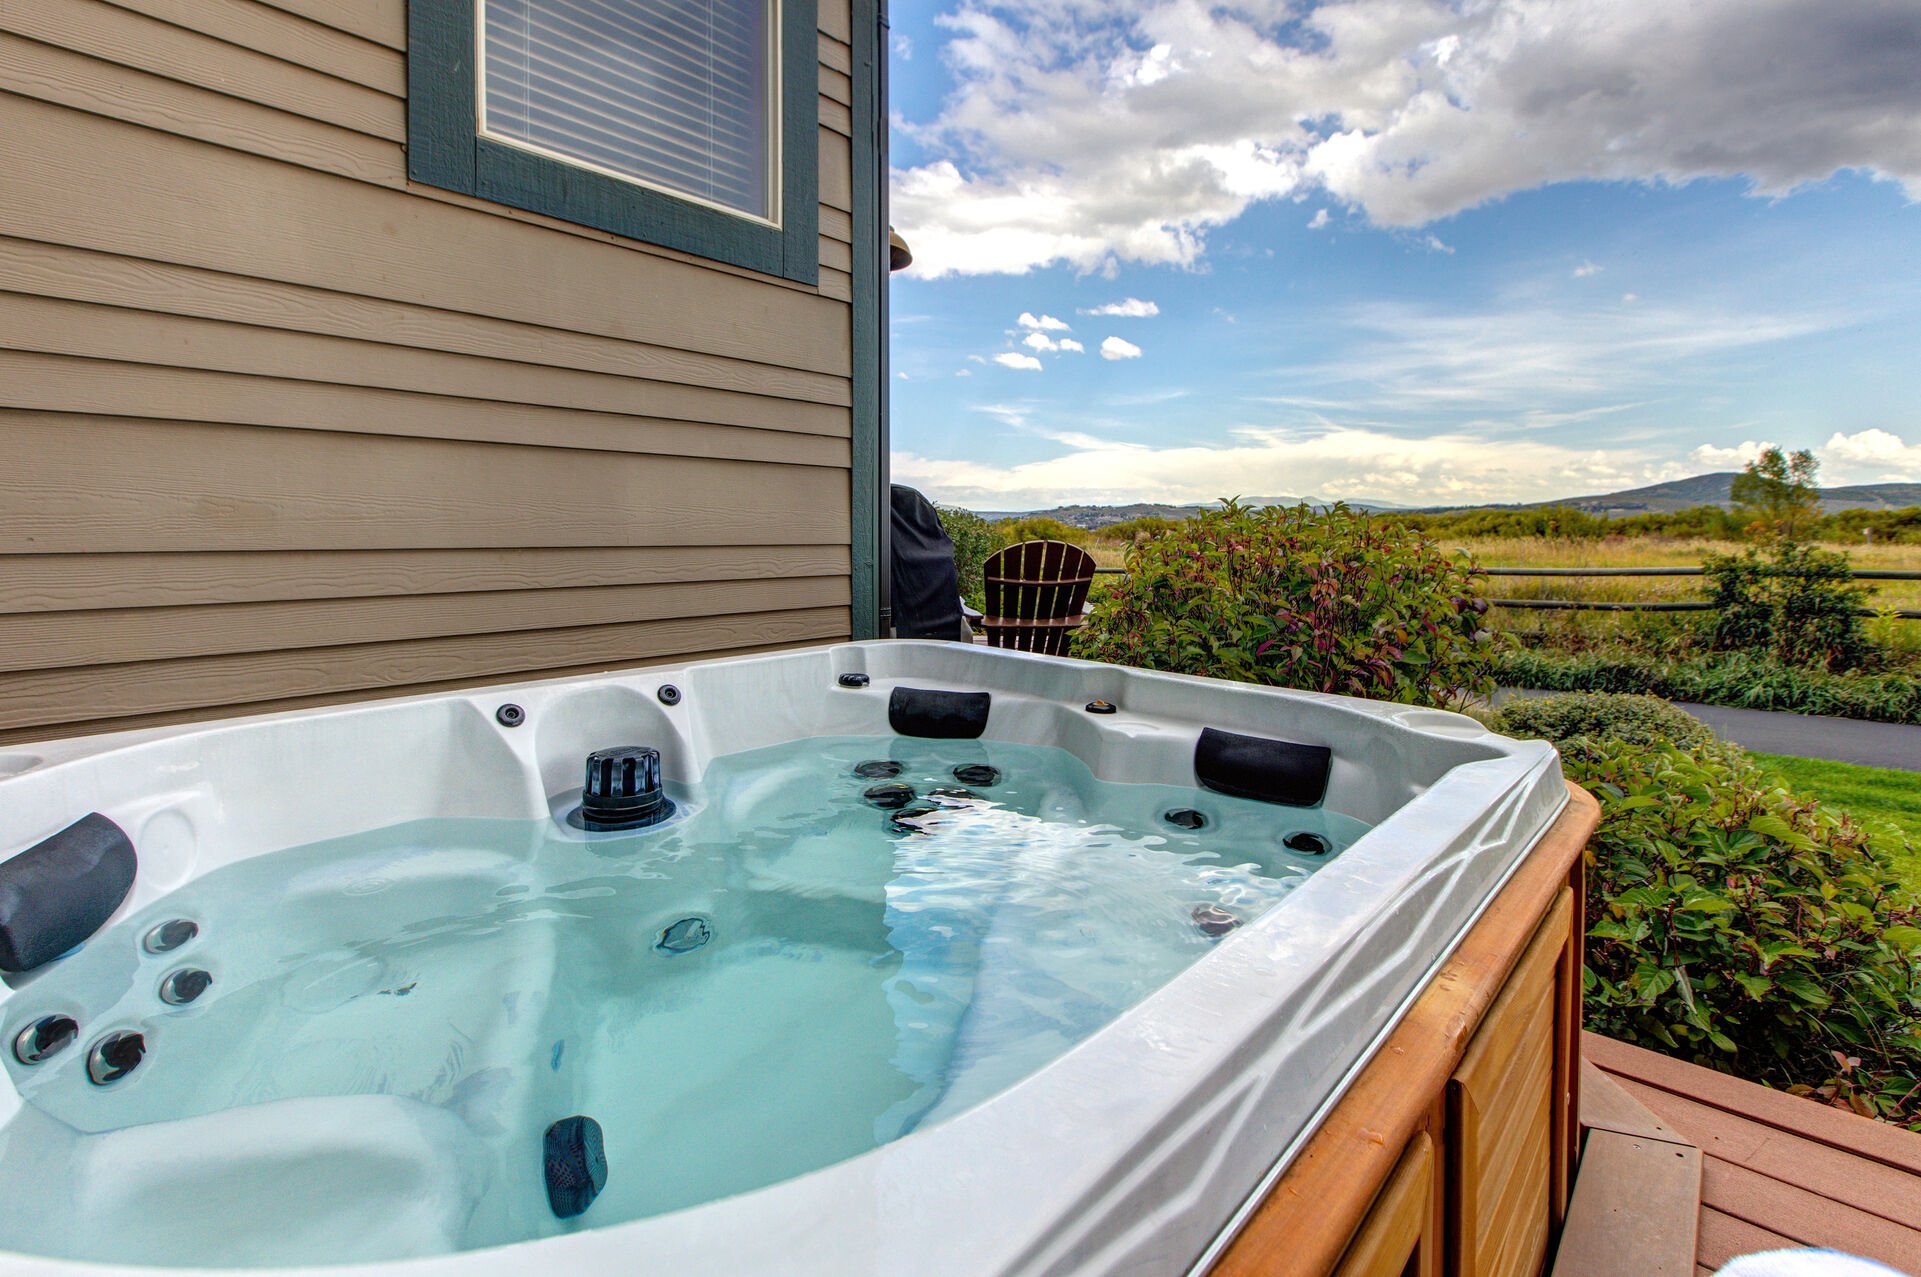 Main Level private patio with hot tub, seating and table for two, and beautiful surrounding views